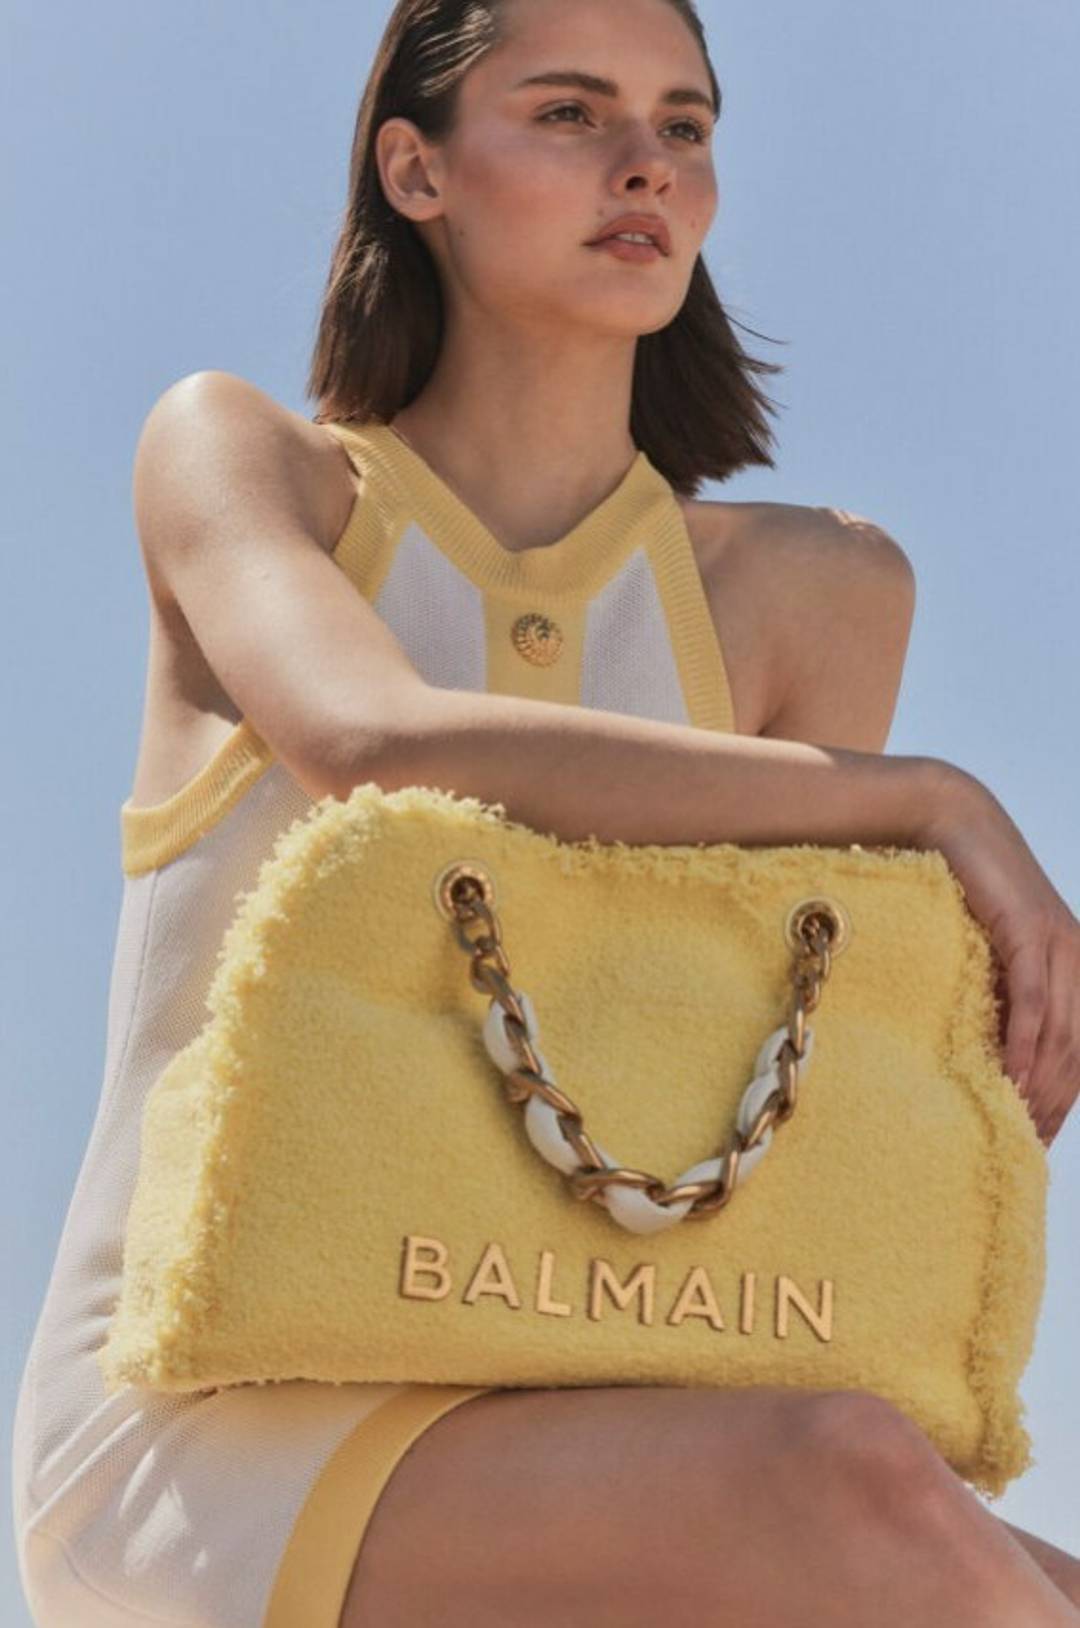 The exclusive Balmain Beach Club collection evokes the spirit and colors of the South of France.